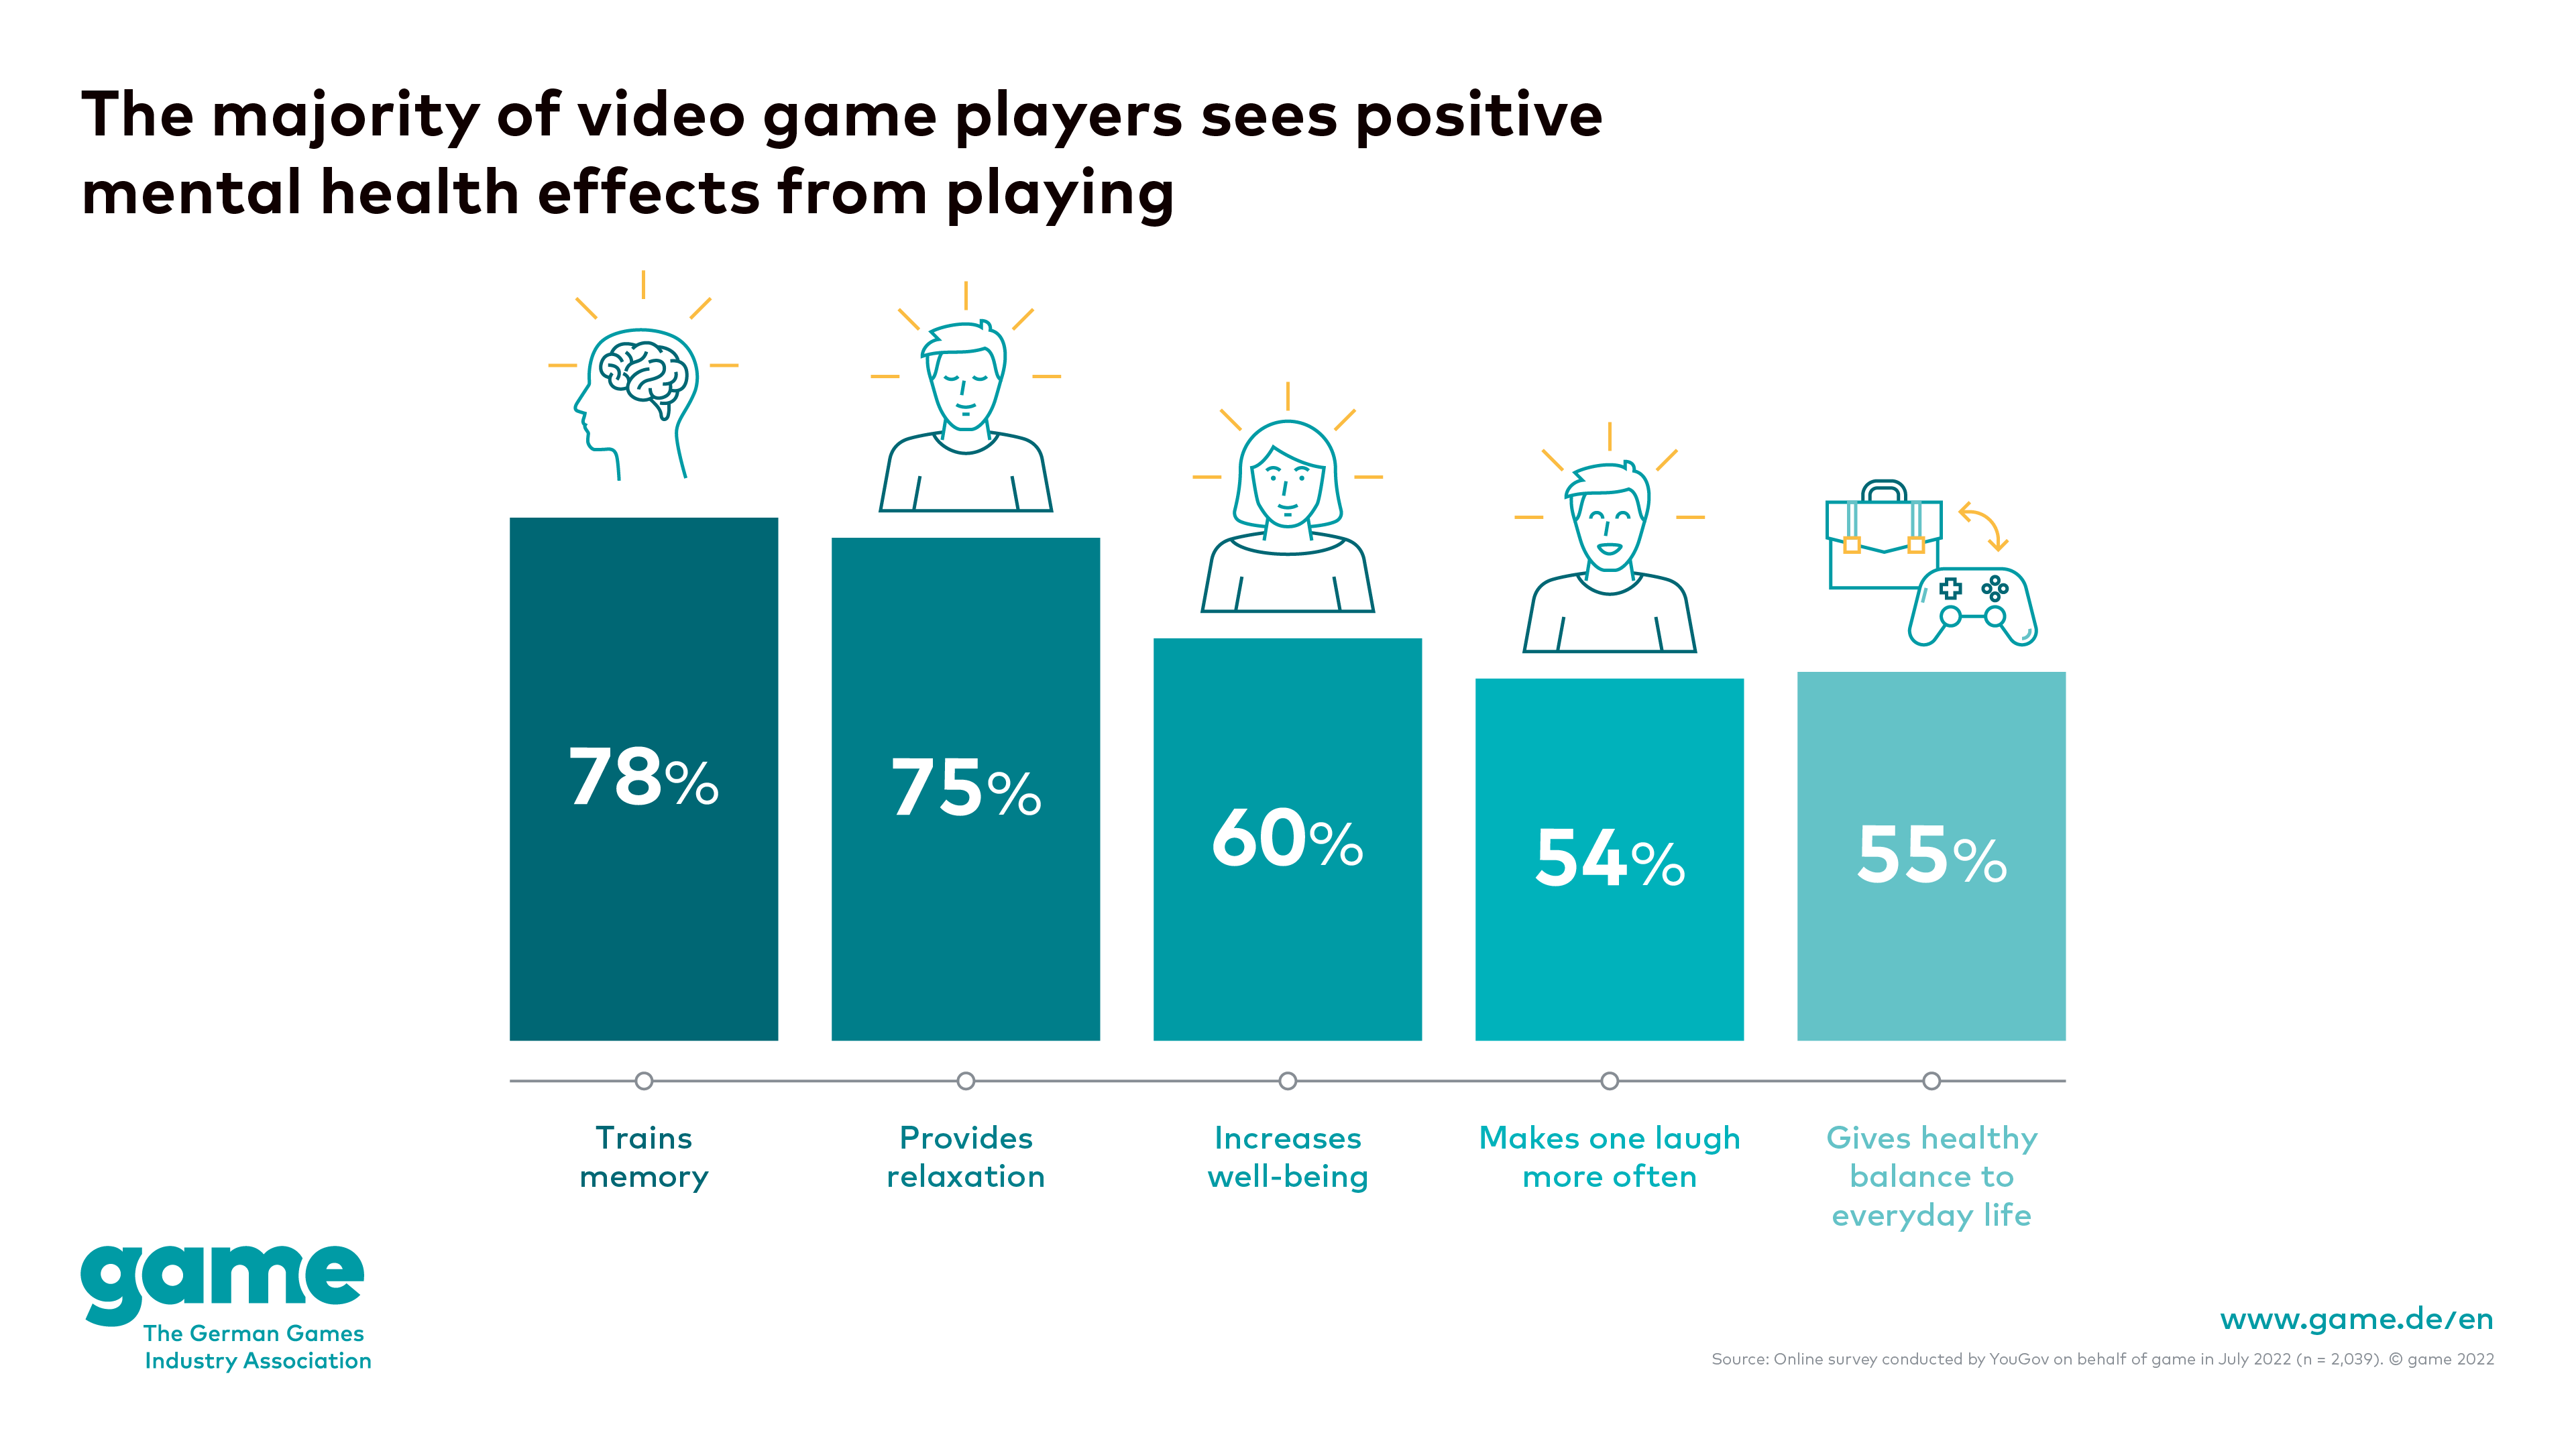 The majority of video game players sees positive mental health effects from playing